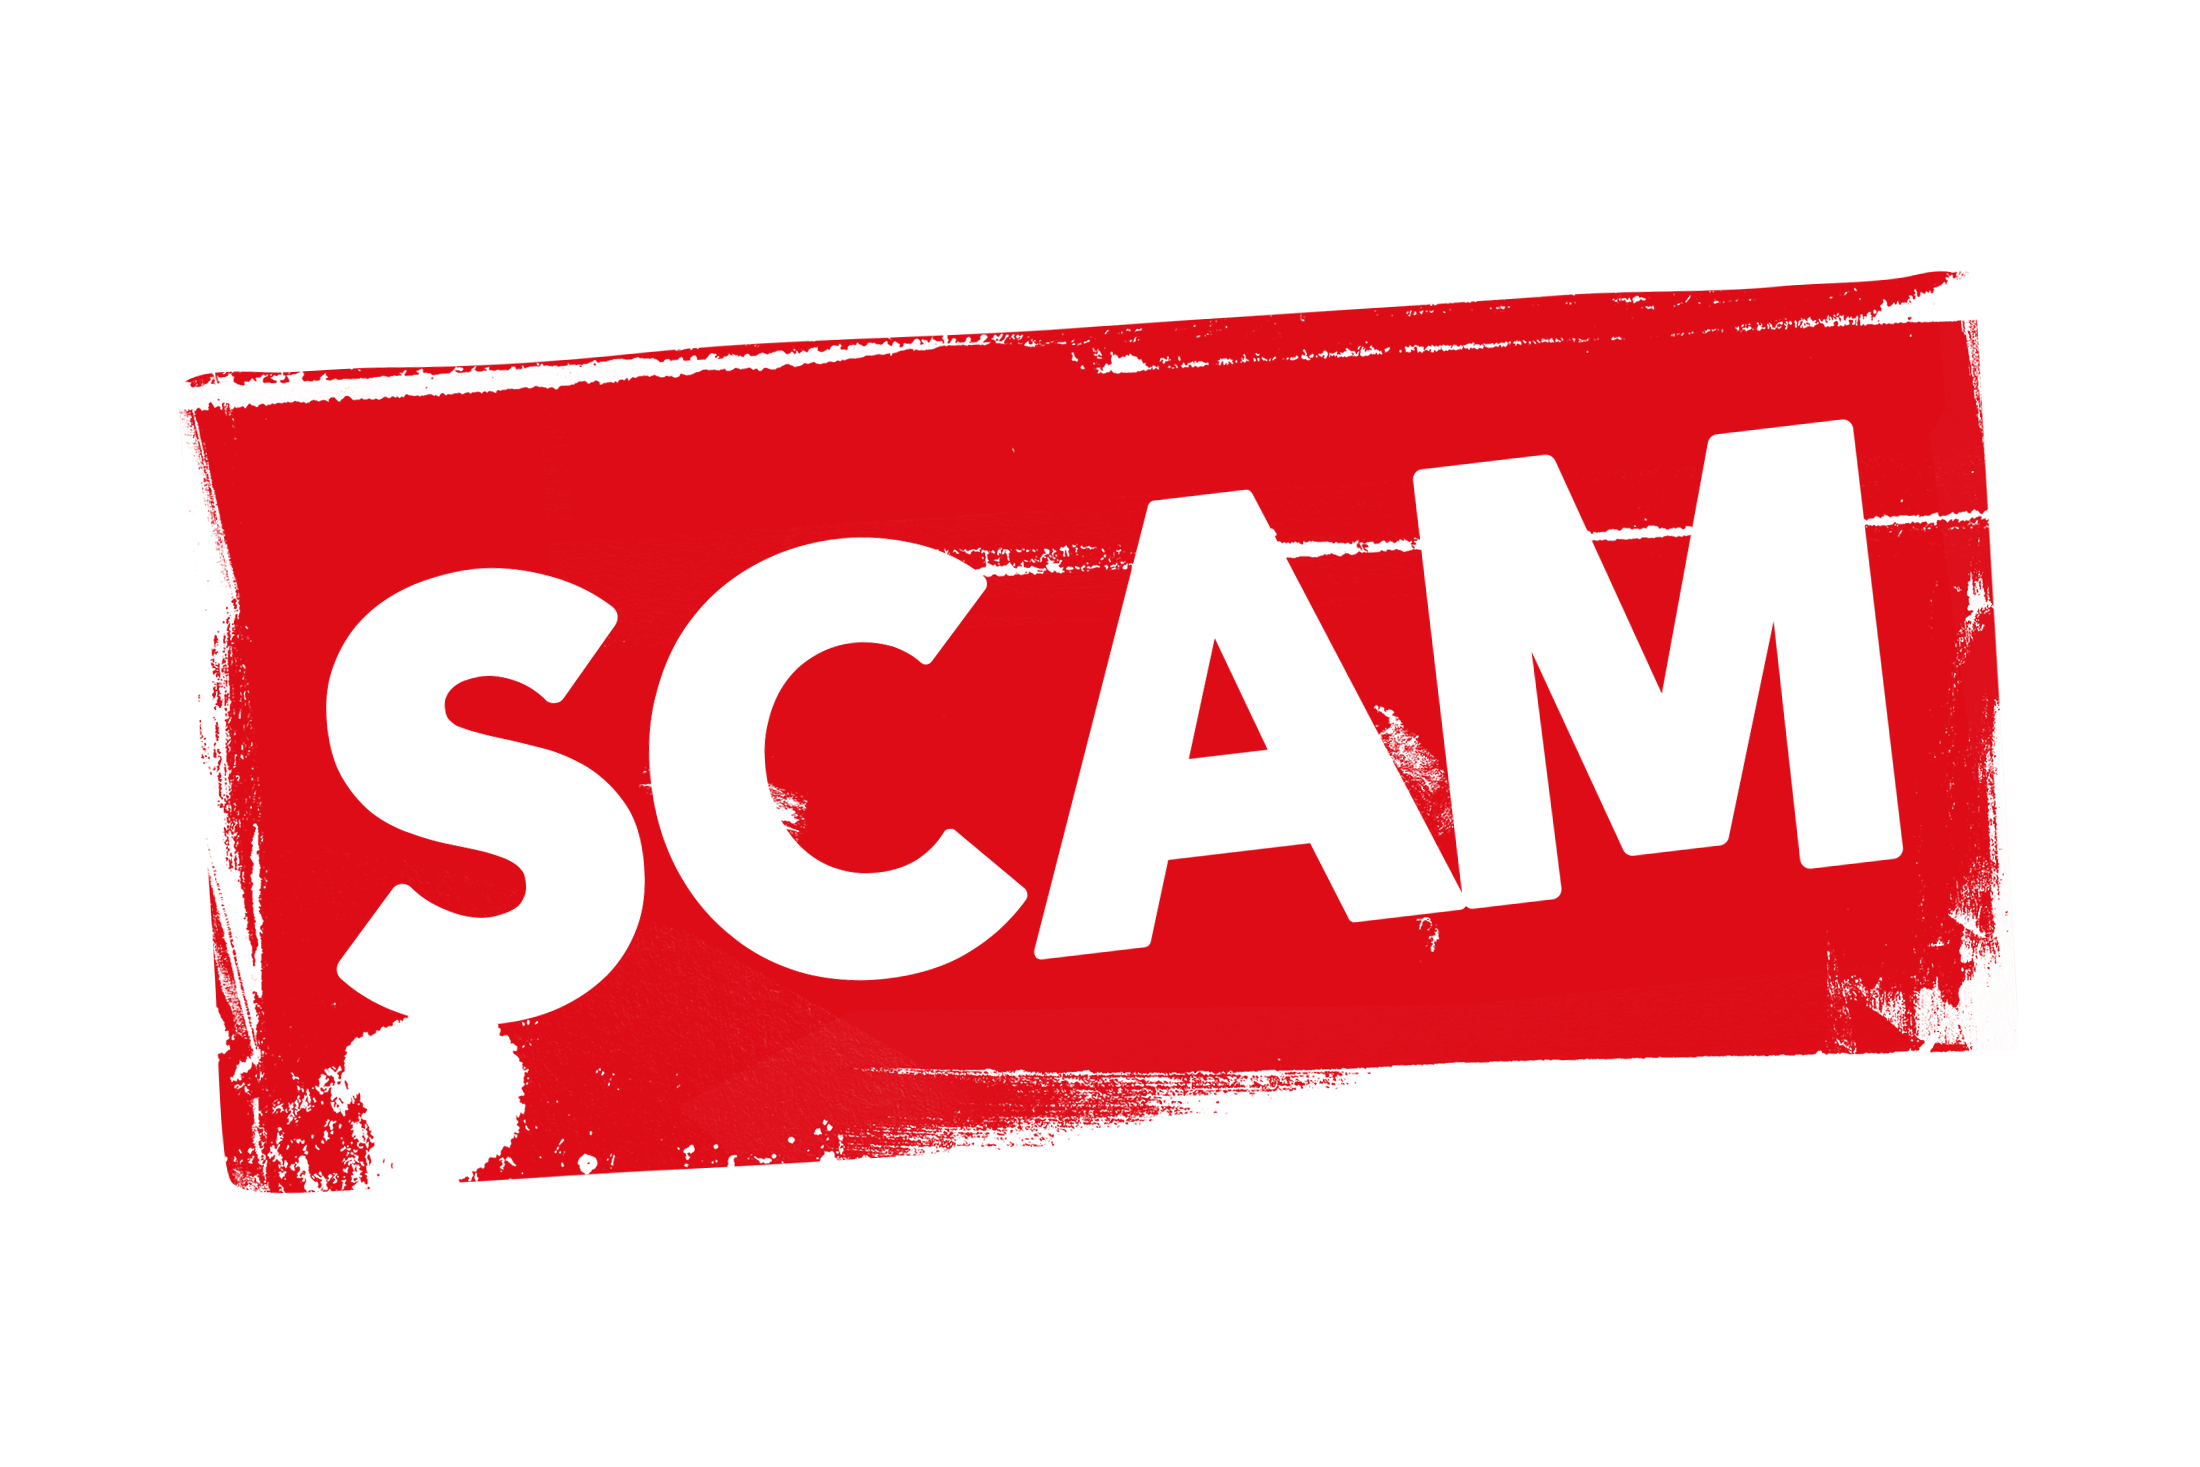 Scam on steam фото 105